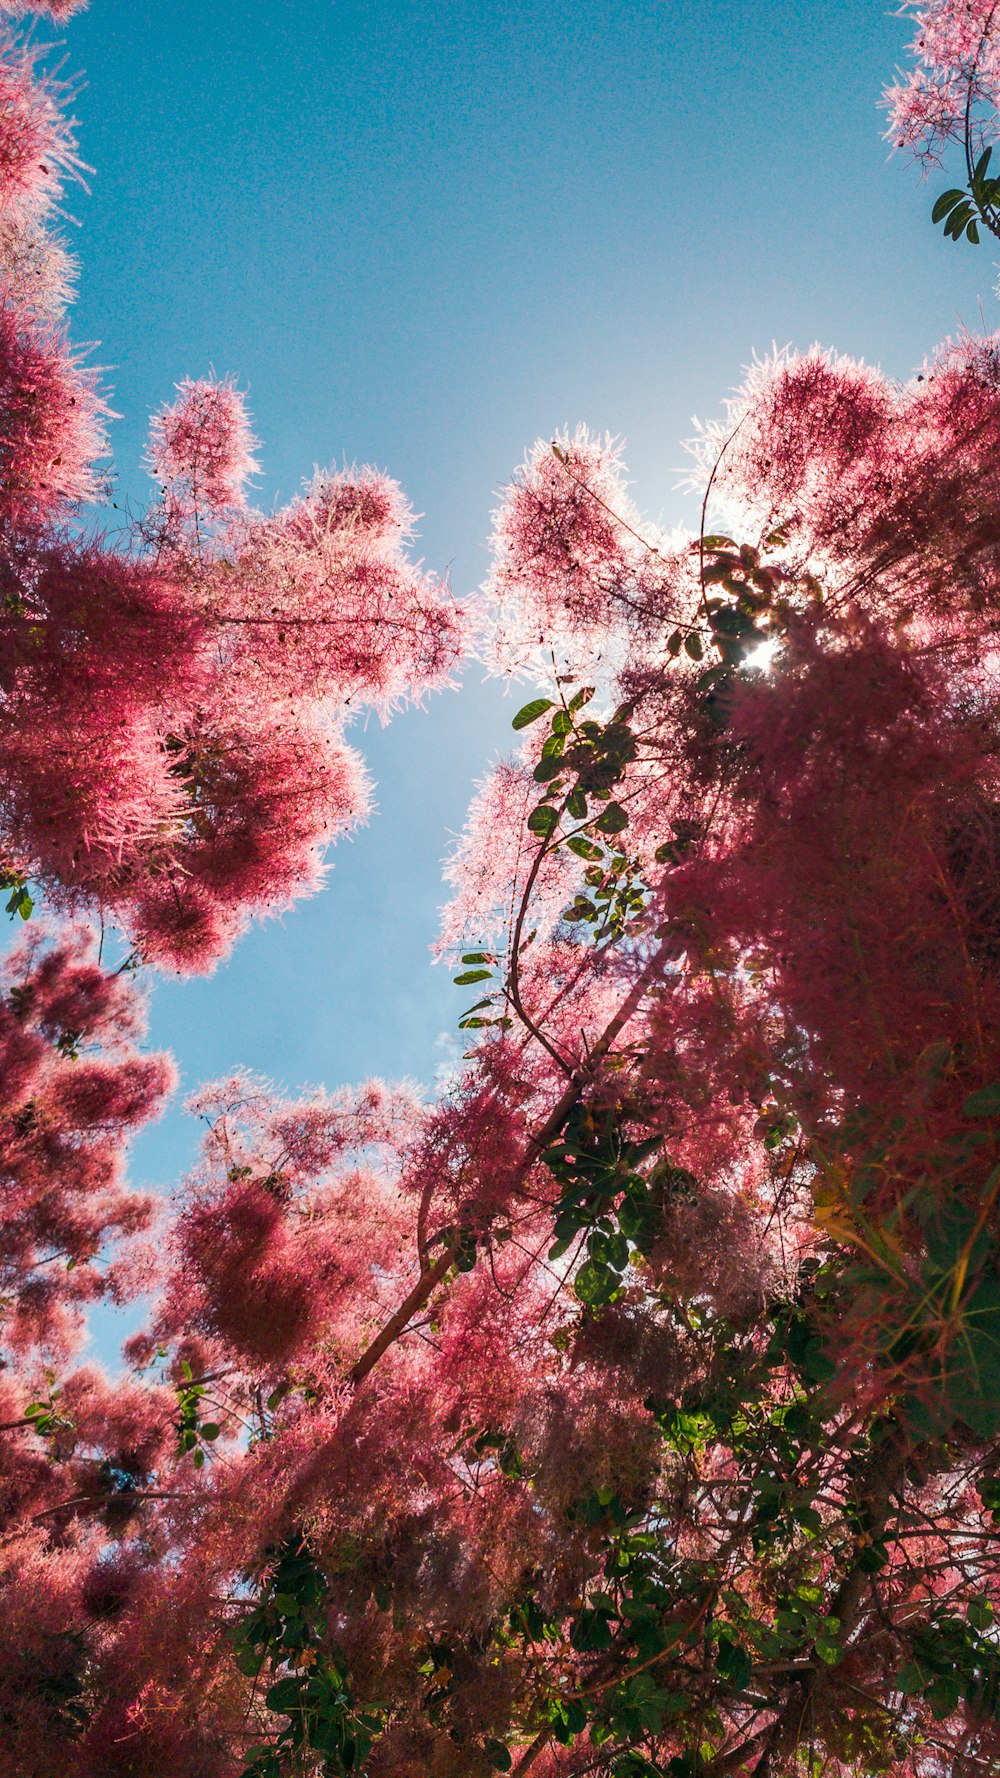 the sun shines through the pink flowers of a tree